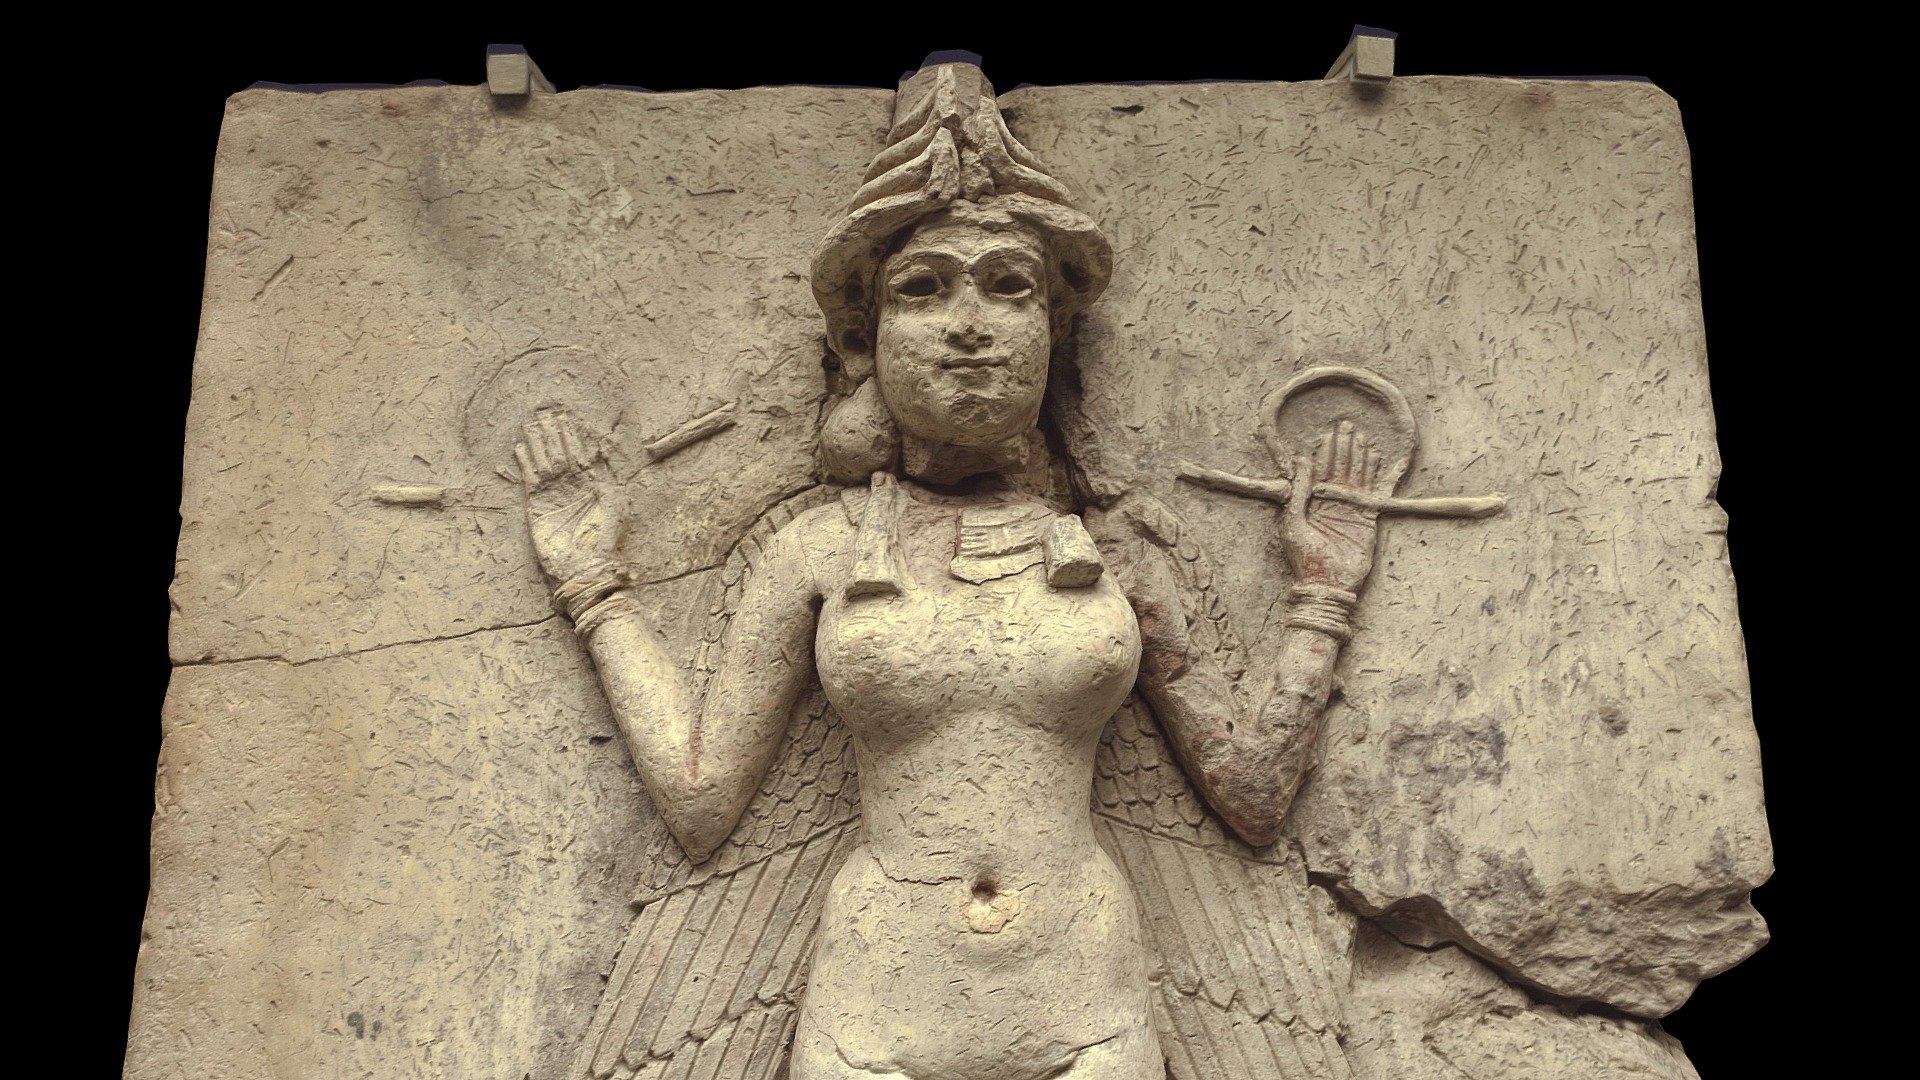 ---------------------------------------------------------
Obtained from 33 photographs.
The Queen of the Night is a Mesopotamian terracotta plaque in high relief of the Isin-Larsa- or Old-Babylonian period, depicting a winged, nude, goddess-like figure with bird's talons, flanked by owls, and perched upon two lions.
The relief is displayed in the British Museum in London, which has dated it between 1800 and 1750 BCE. It originates from southern Mesopotamia, but the exact find-site is unknown. Apart from its distinctive iconography, the piece is noted for its high relief and relatively large size, which suggest that it was used as a cult relief, making it a very rare survival from the period. However, whether it represents Lilitu, Inanna/Ishtar, or Ereshkigal is under debate. The authenticity of the object has been questioned from its first appearance in the 1930s, but opinion has generally moved in its favour over the subsequent decades 3d model